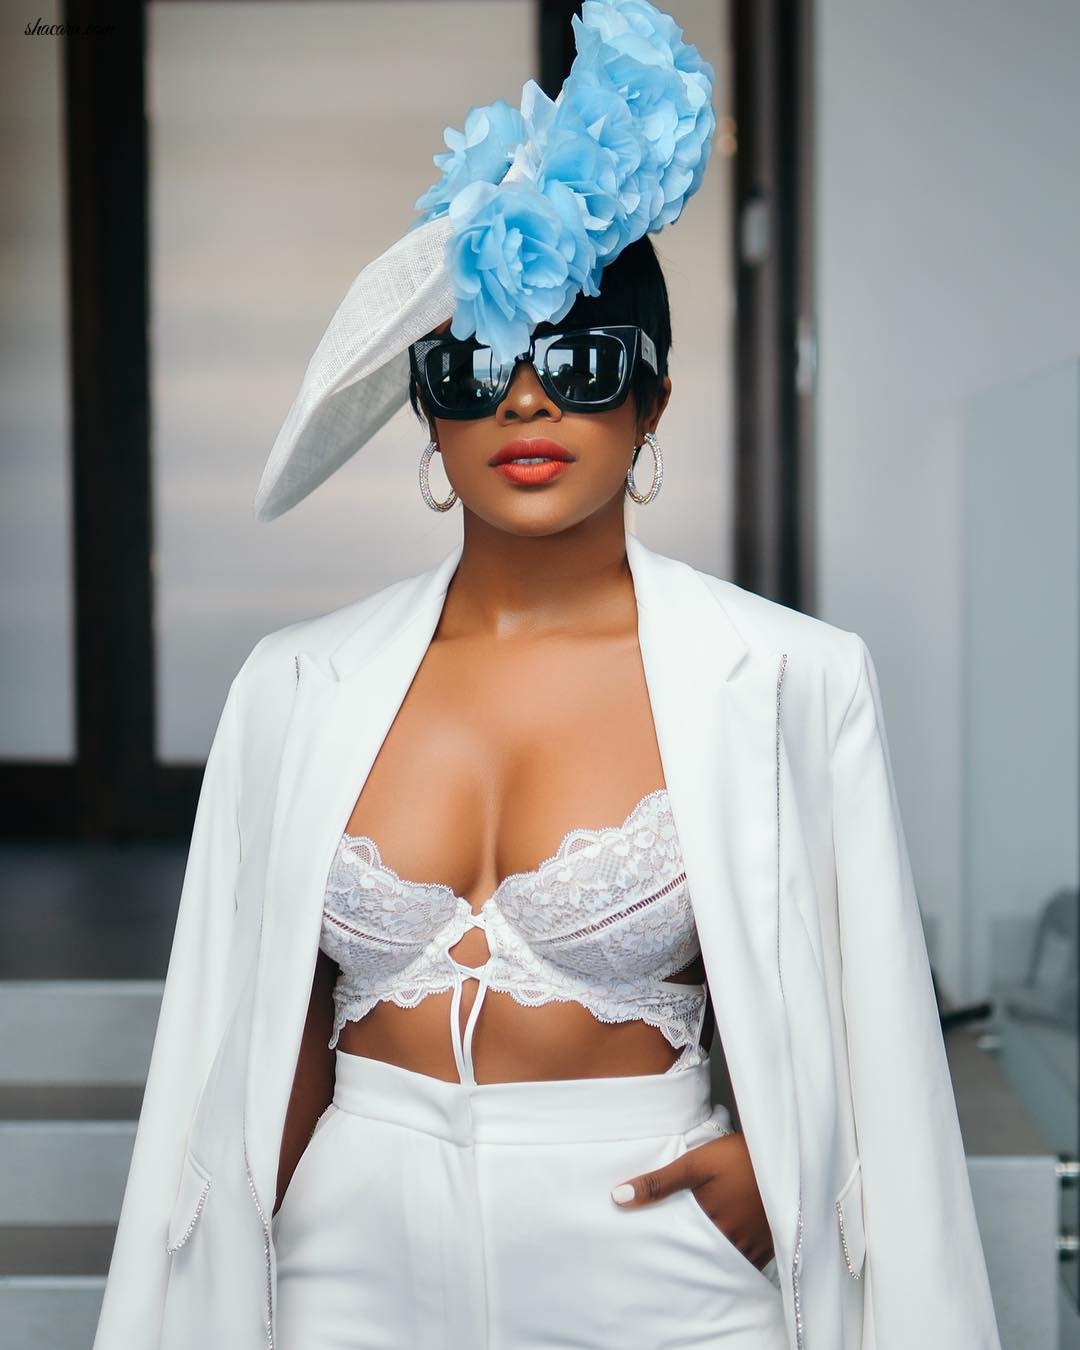 We’re Obsessing Over Nomzamo Mbatha’s Killer All-White Look